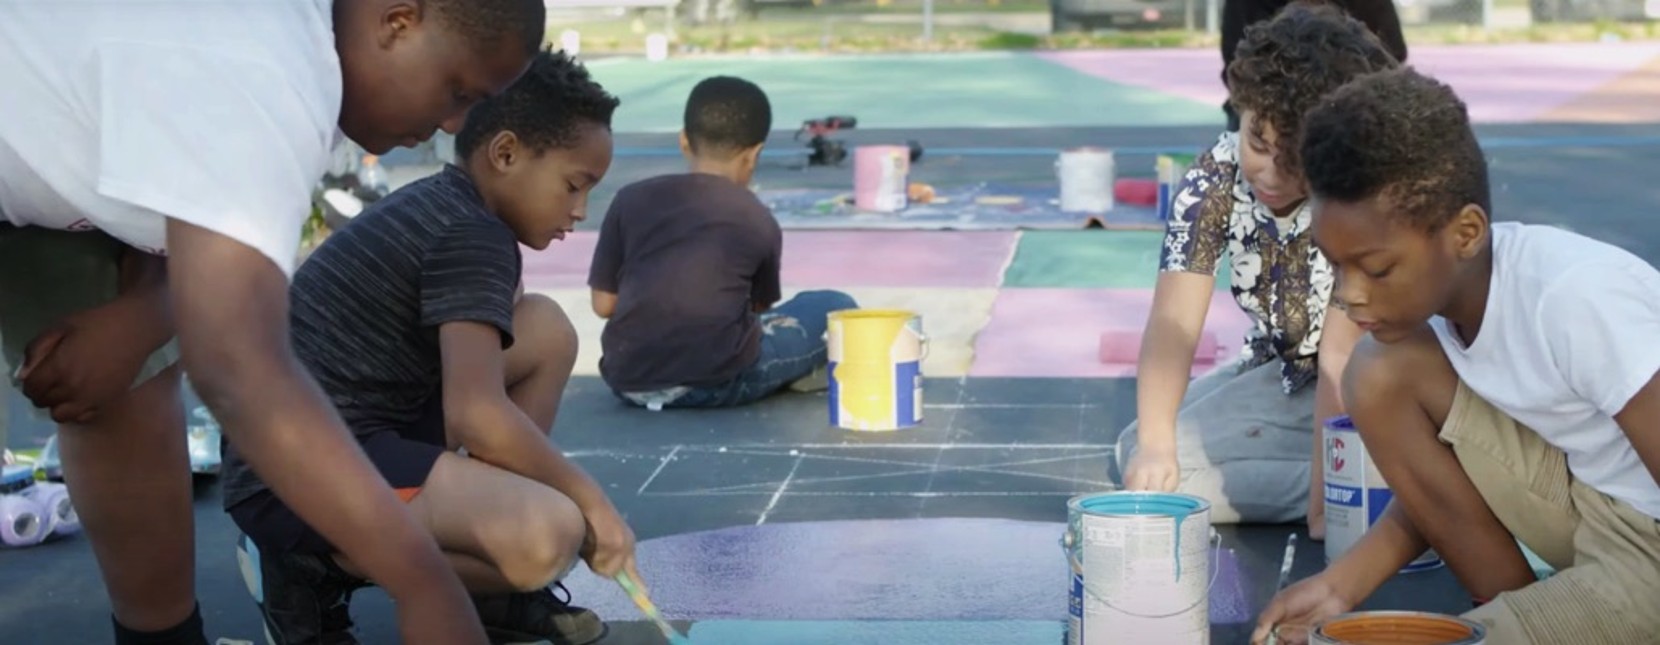 Children outdoors painting on a playground.